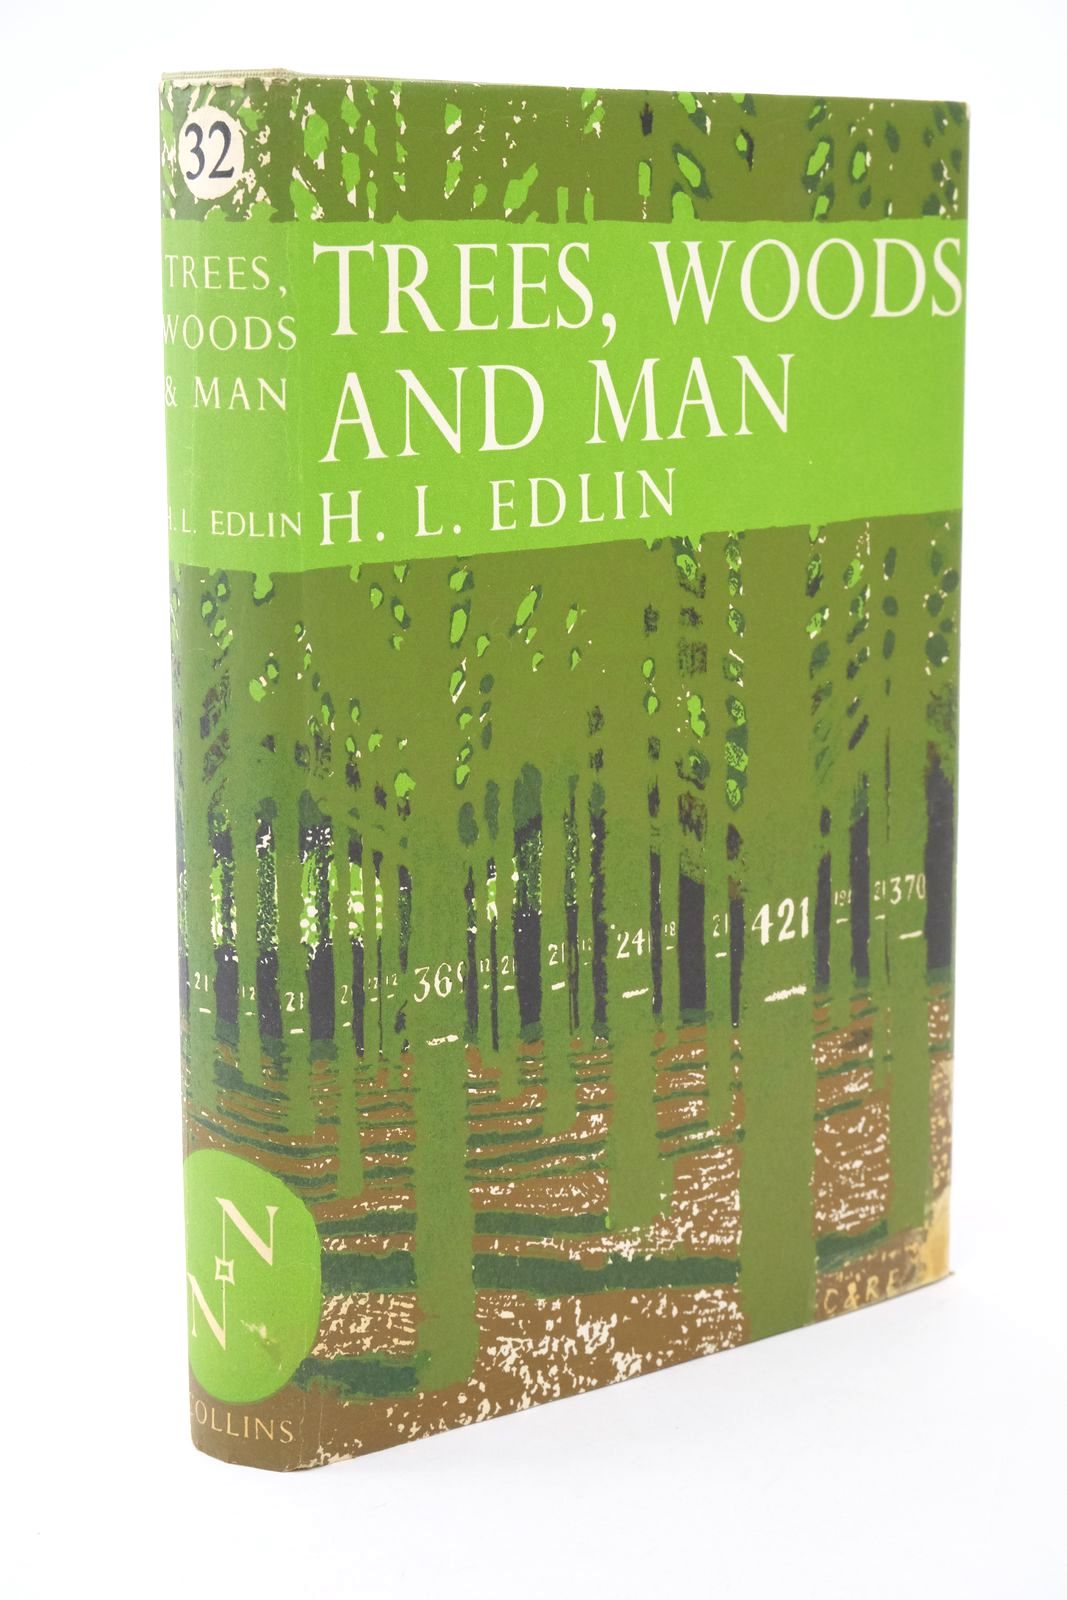 Photo of TREES WOODS AND MAN (NN 32) written by Edlin, Herbert L. published by Collins (STOCK CODE: 1322495)  for sale by Stella & Rose's Books